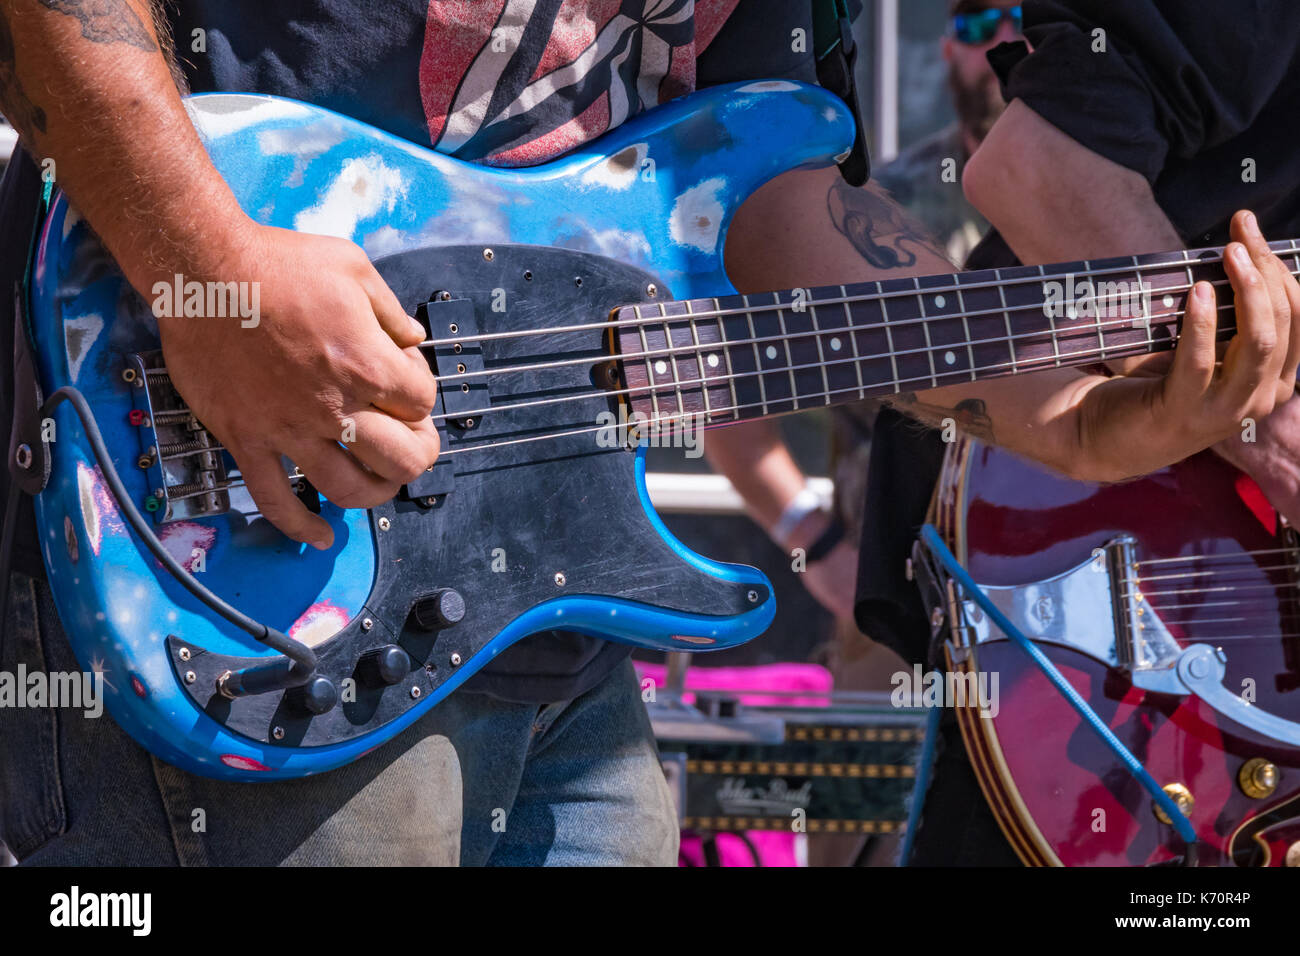 A blue bass guitar being played at a local outdoor rock concert. Stock Photo